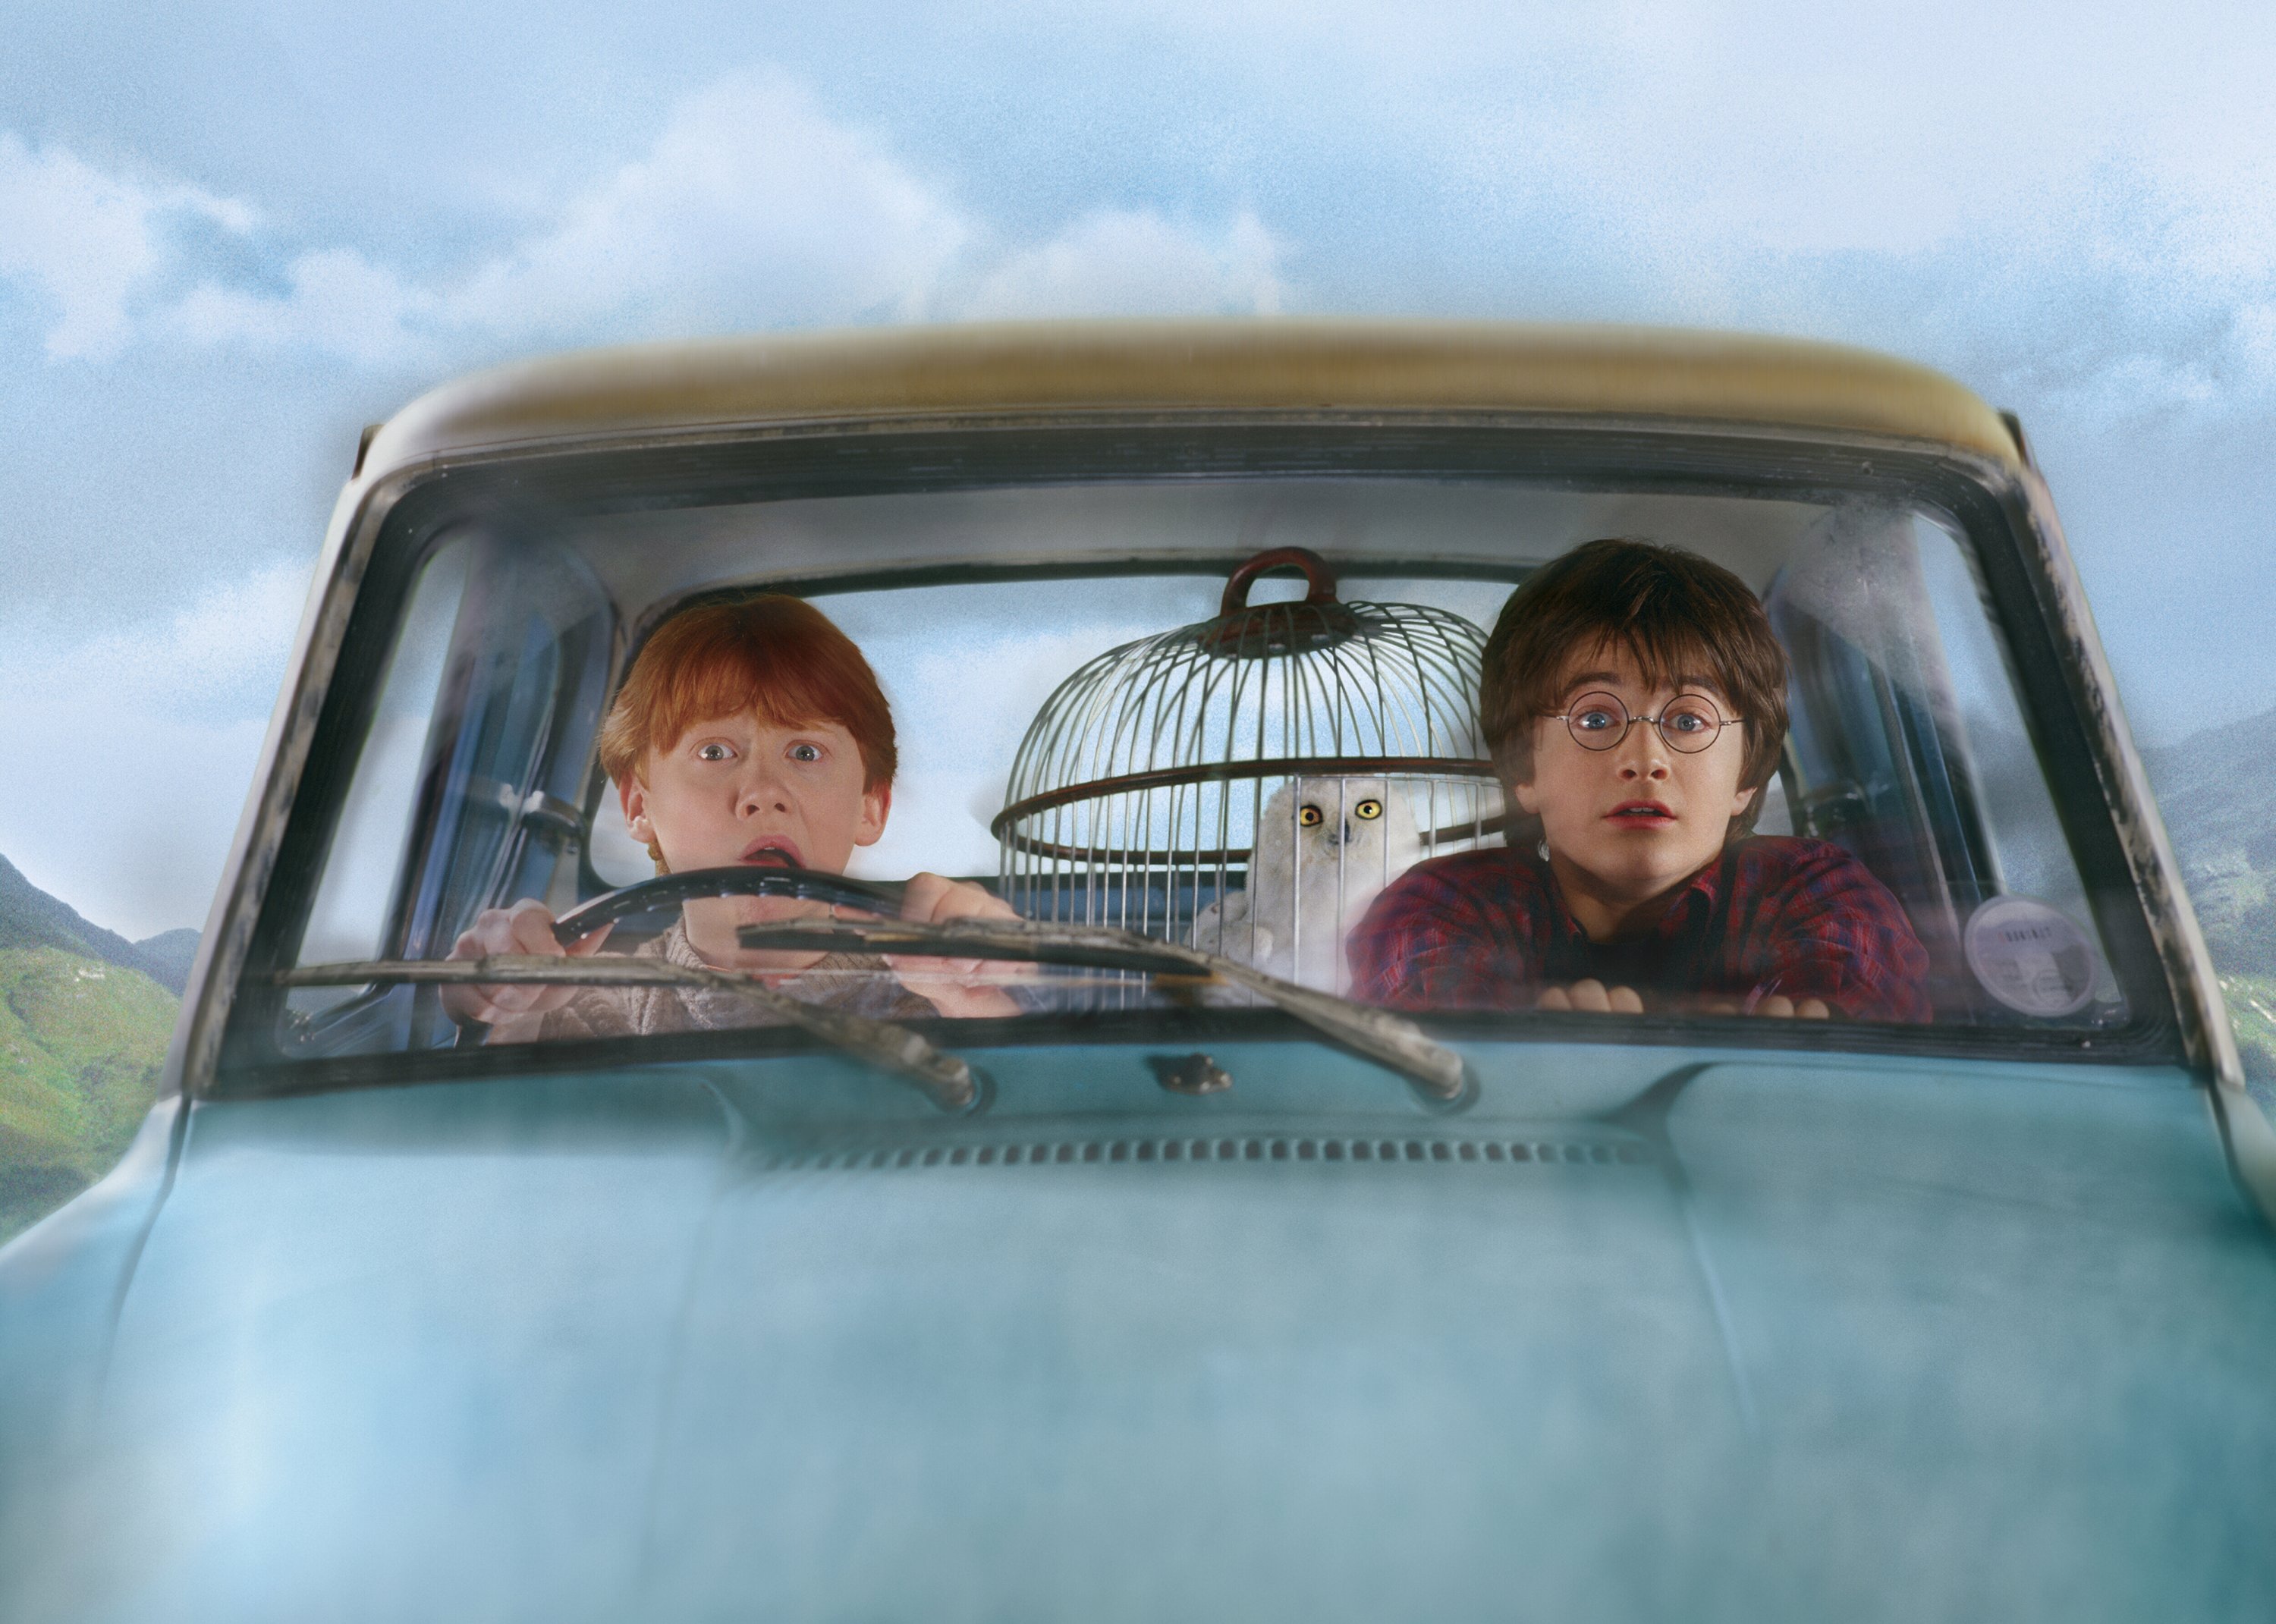 harry potter and the chamber of secrets, harry potter, movie, daniel radcliffe, ron weasley, rupert grint